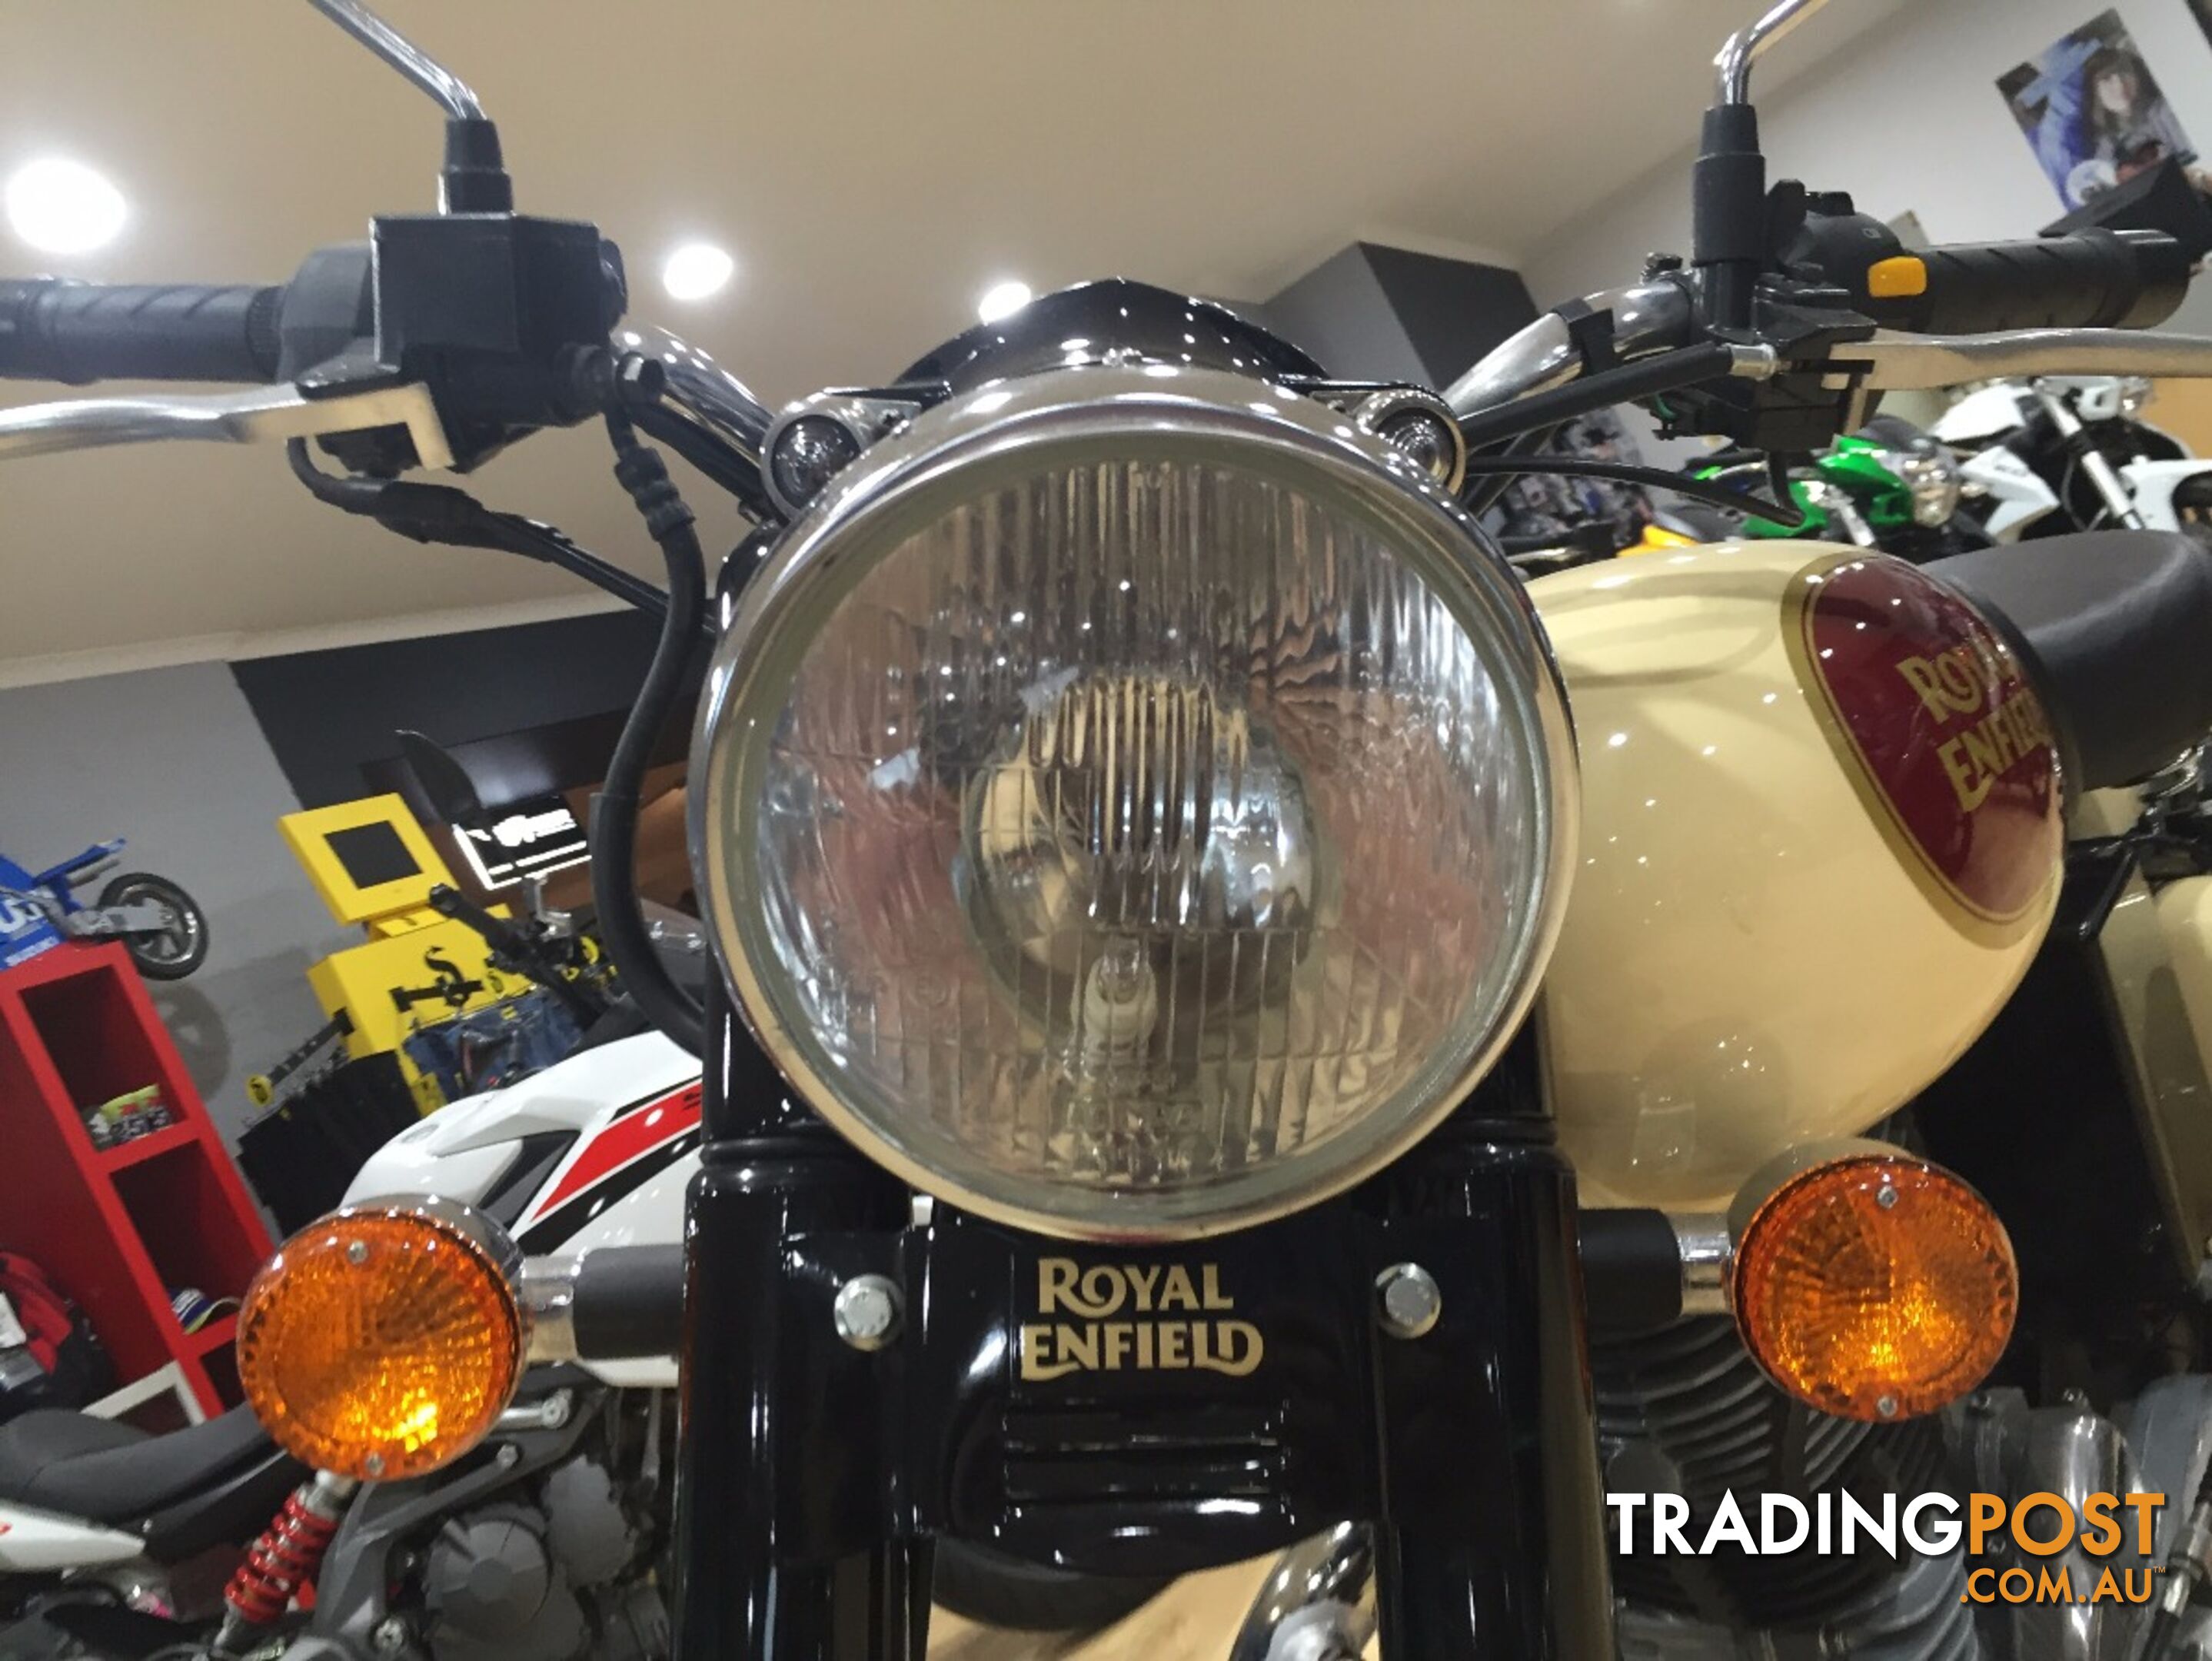 2015 ROYAL ENFIELD (SEE ALSO ENFIELD) BULLET 500 CLASSIC ELEC START 500 ROAD